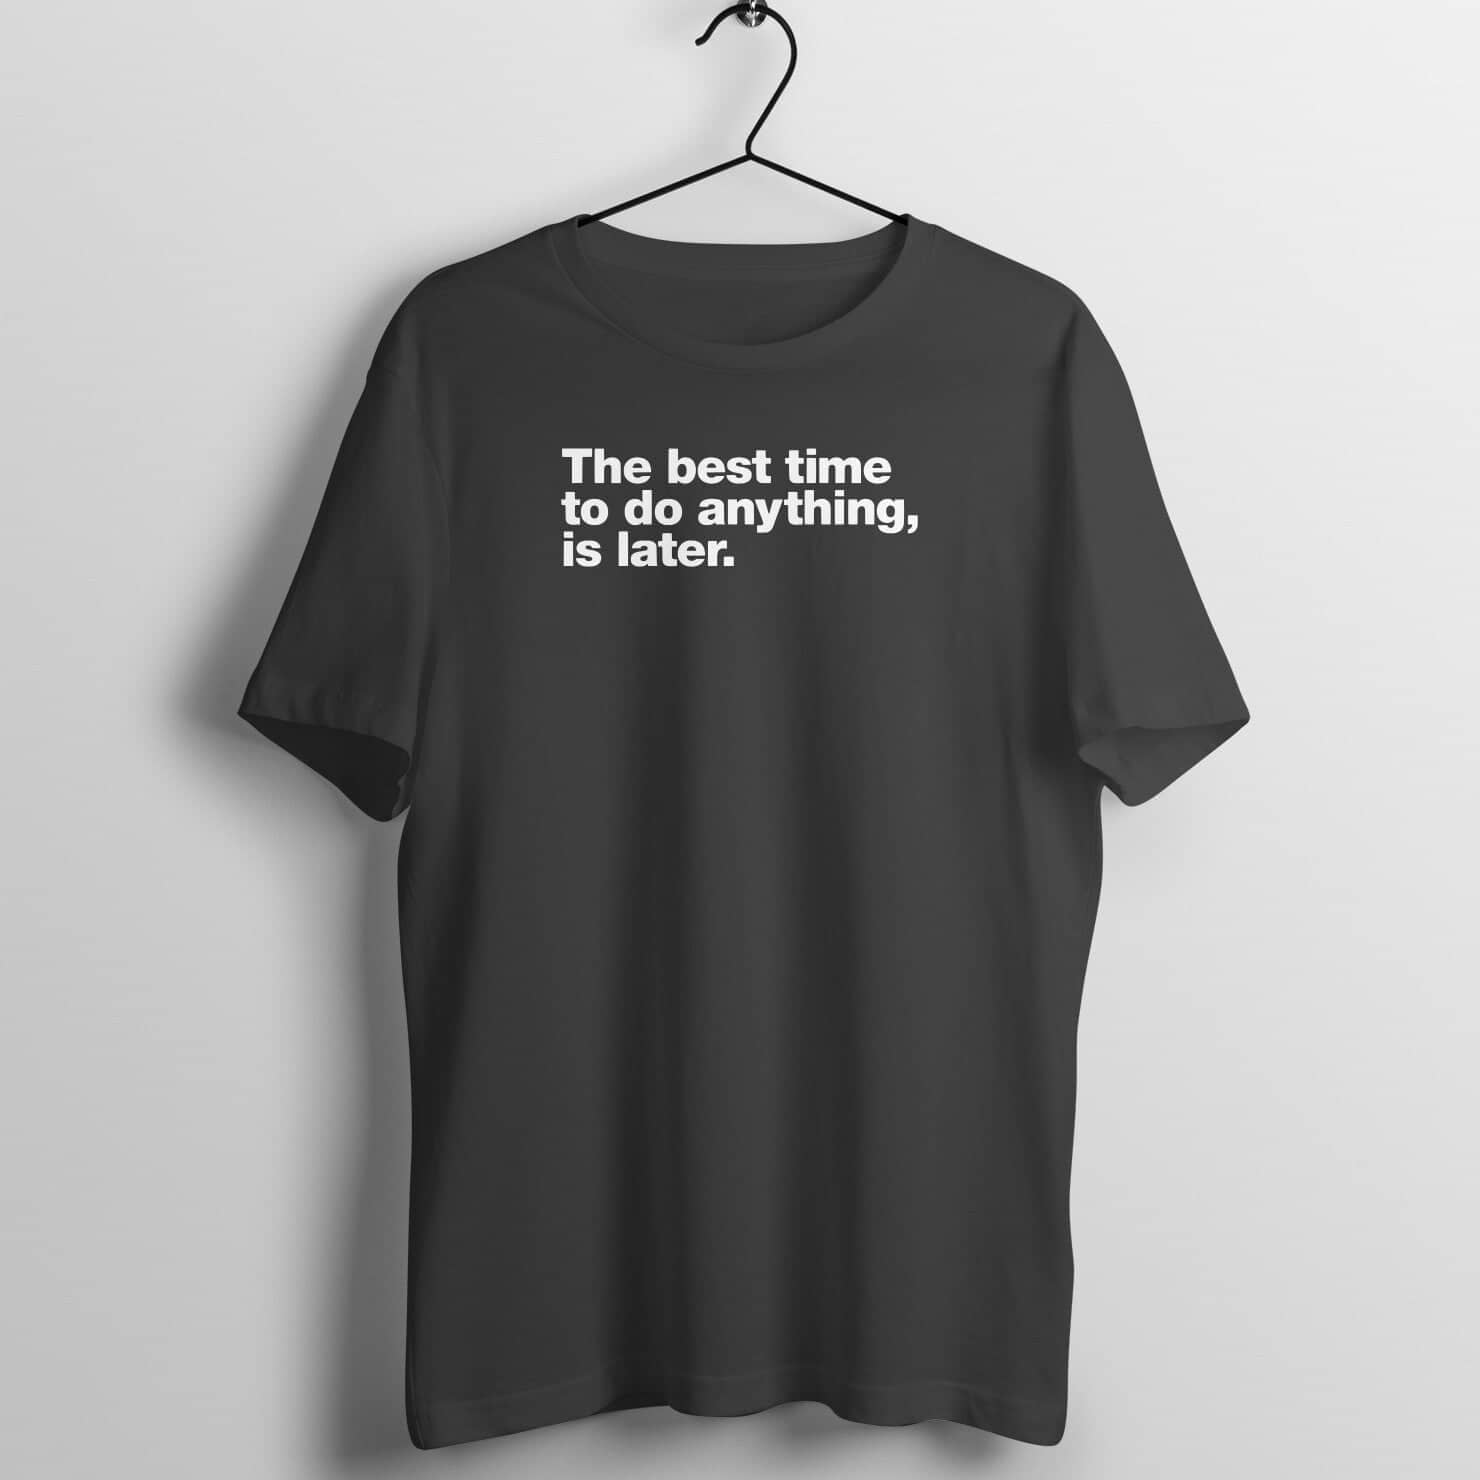 The Best Time to Do Anything is Later Funny Black T Shirt for Men and Women freeshipping - Catch My Drift India